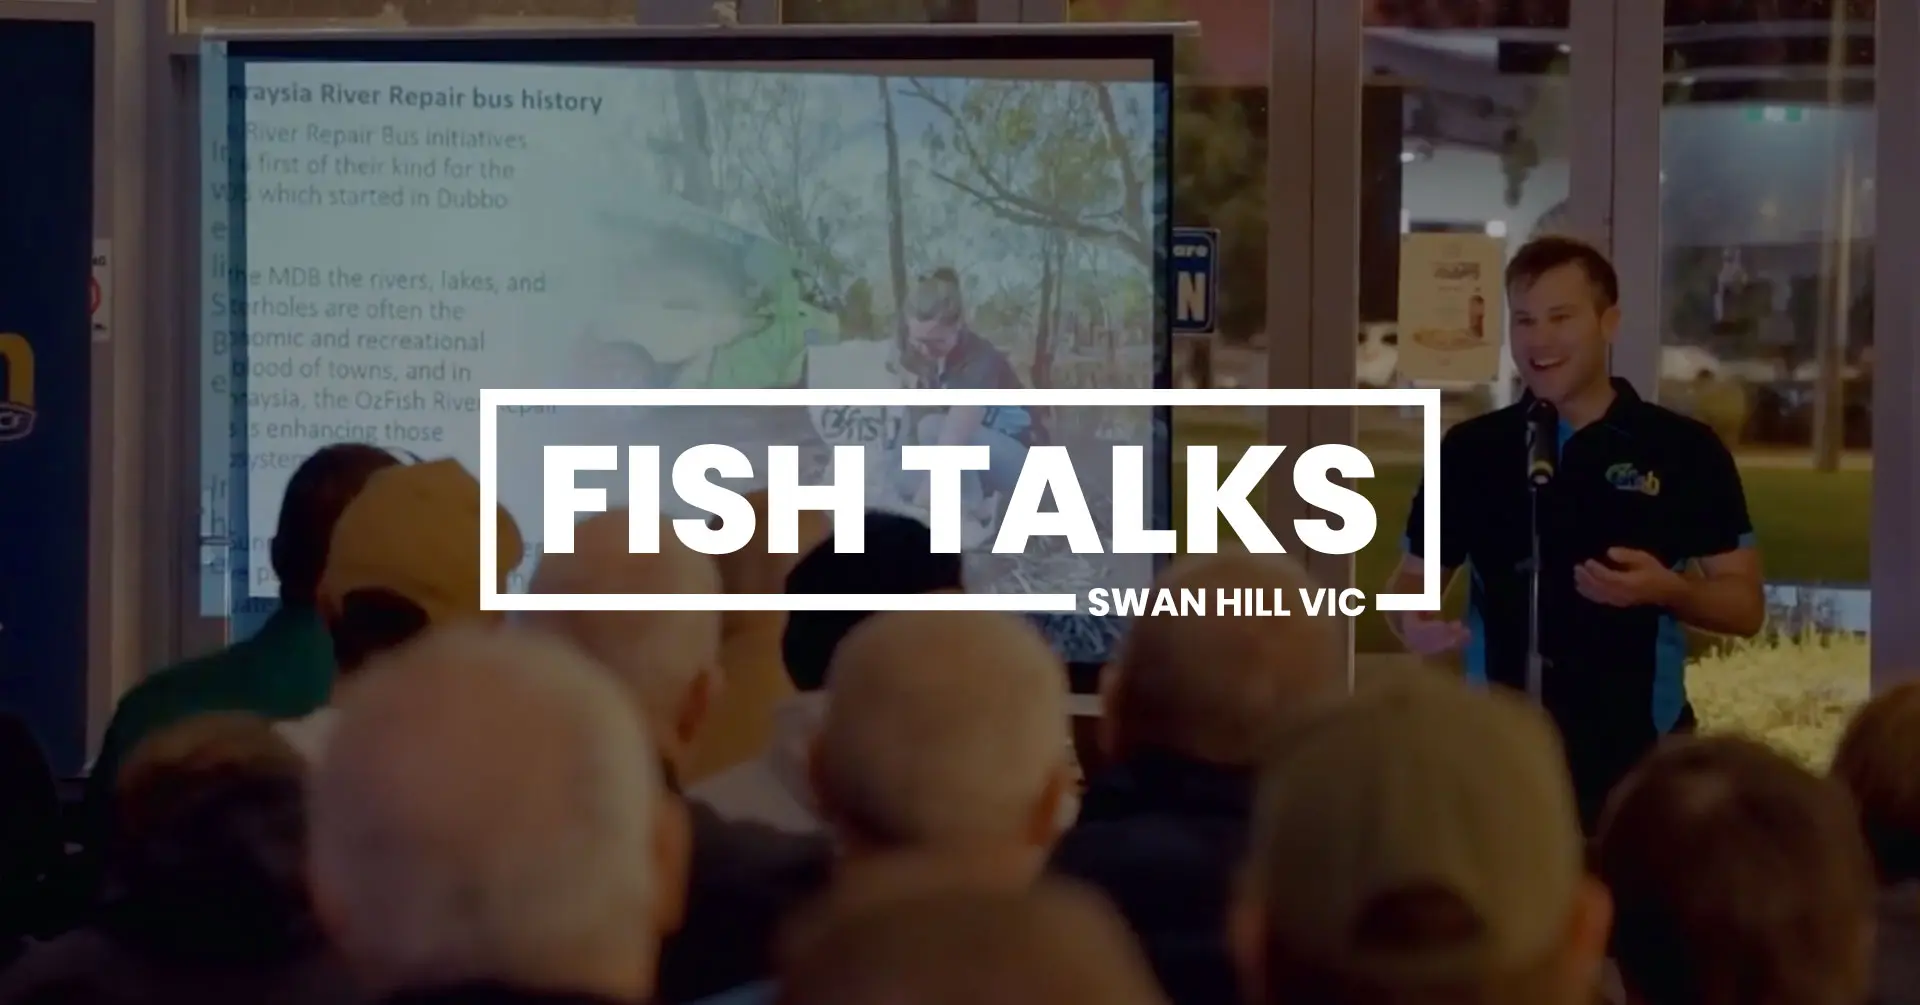 The background is of a person presenting to an audience and the foreground is a logo that says Fish Talks Swan Hill